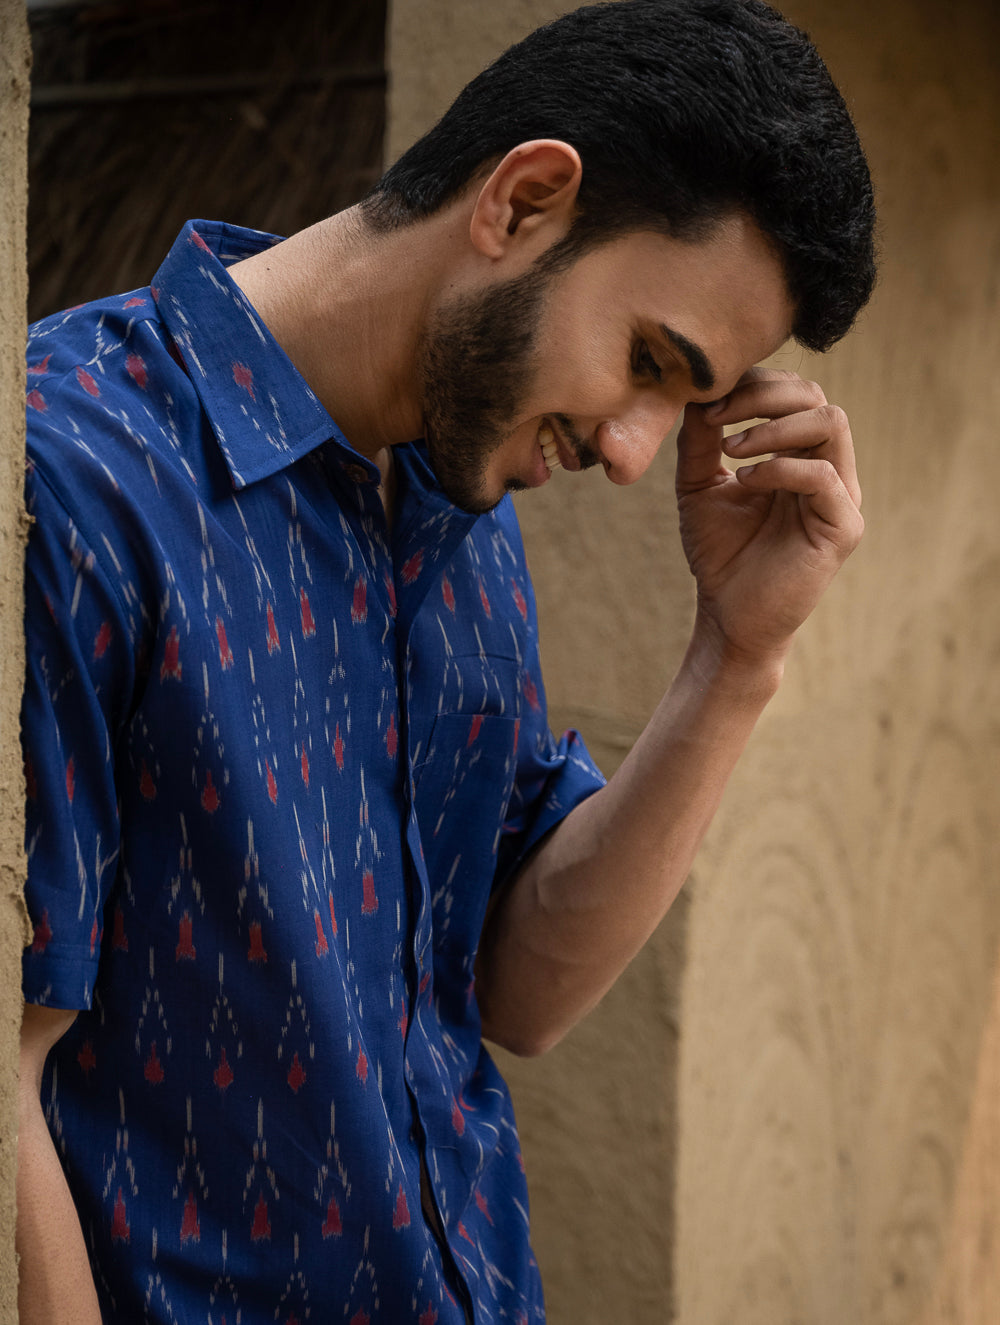 Load image into Gallery viewer, Ikat Hand Woven Soft Cotton Shirt - Blue Arrows